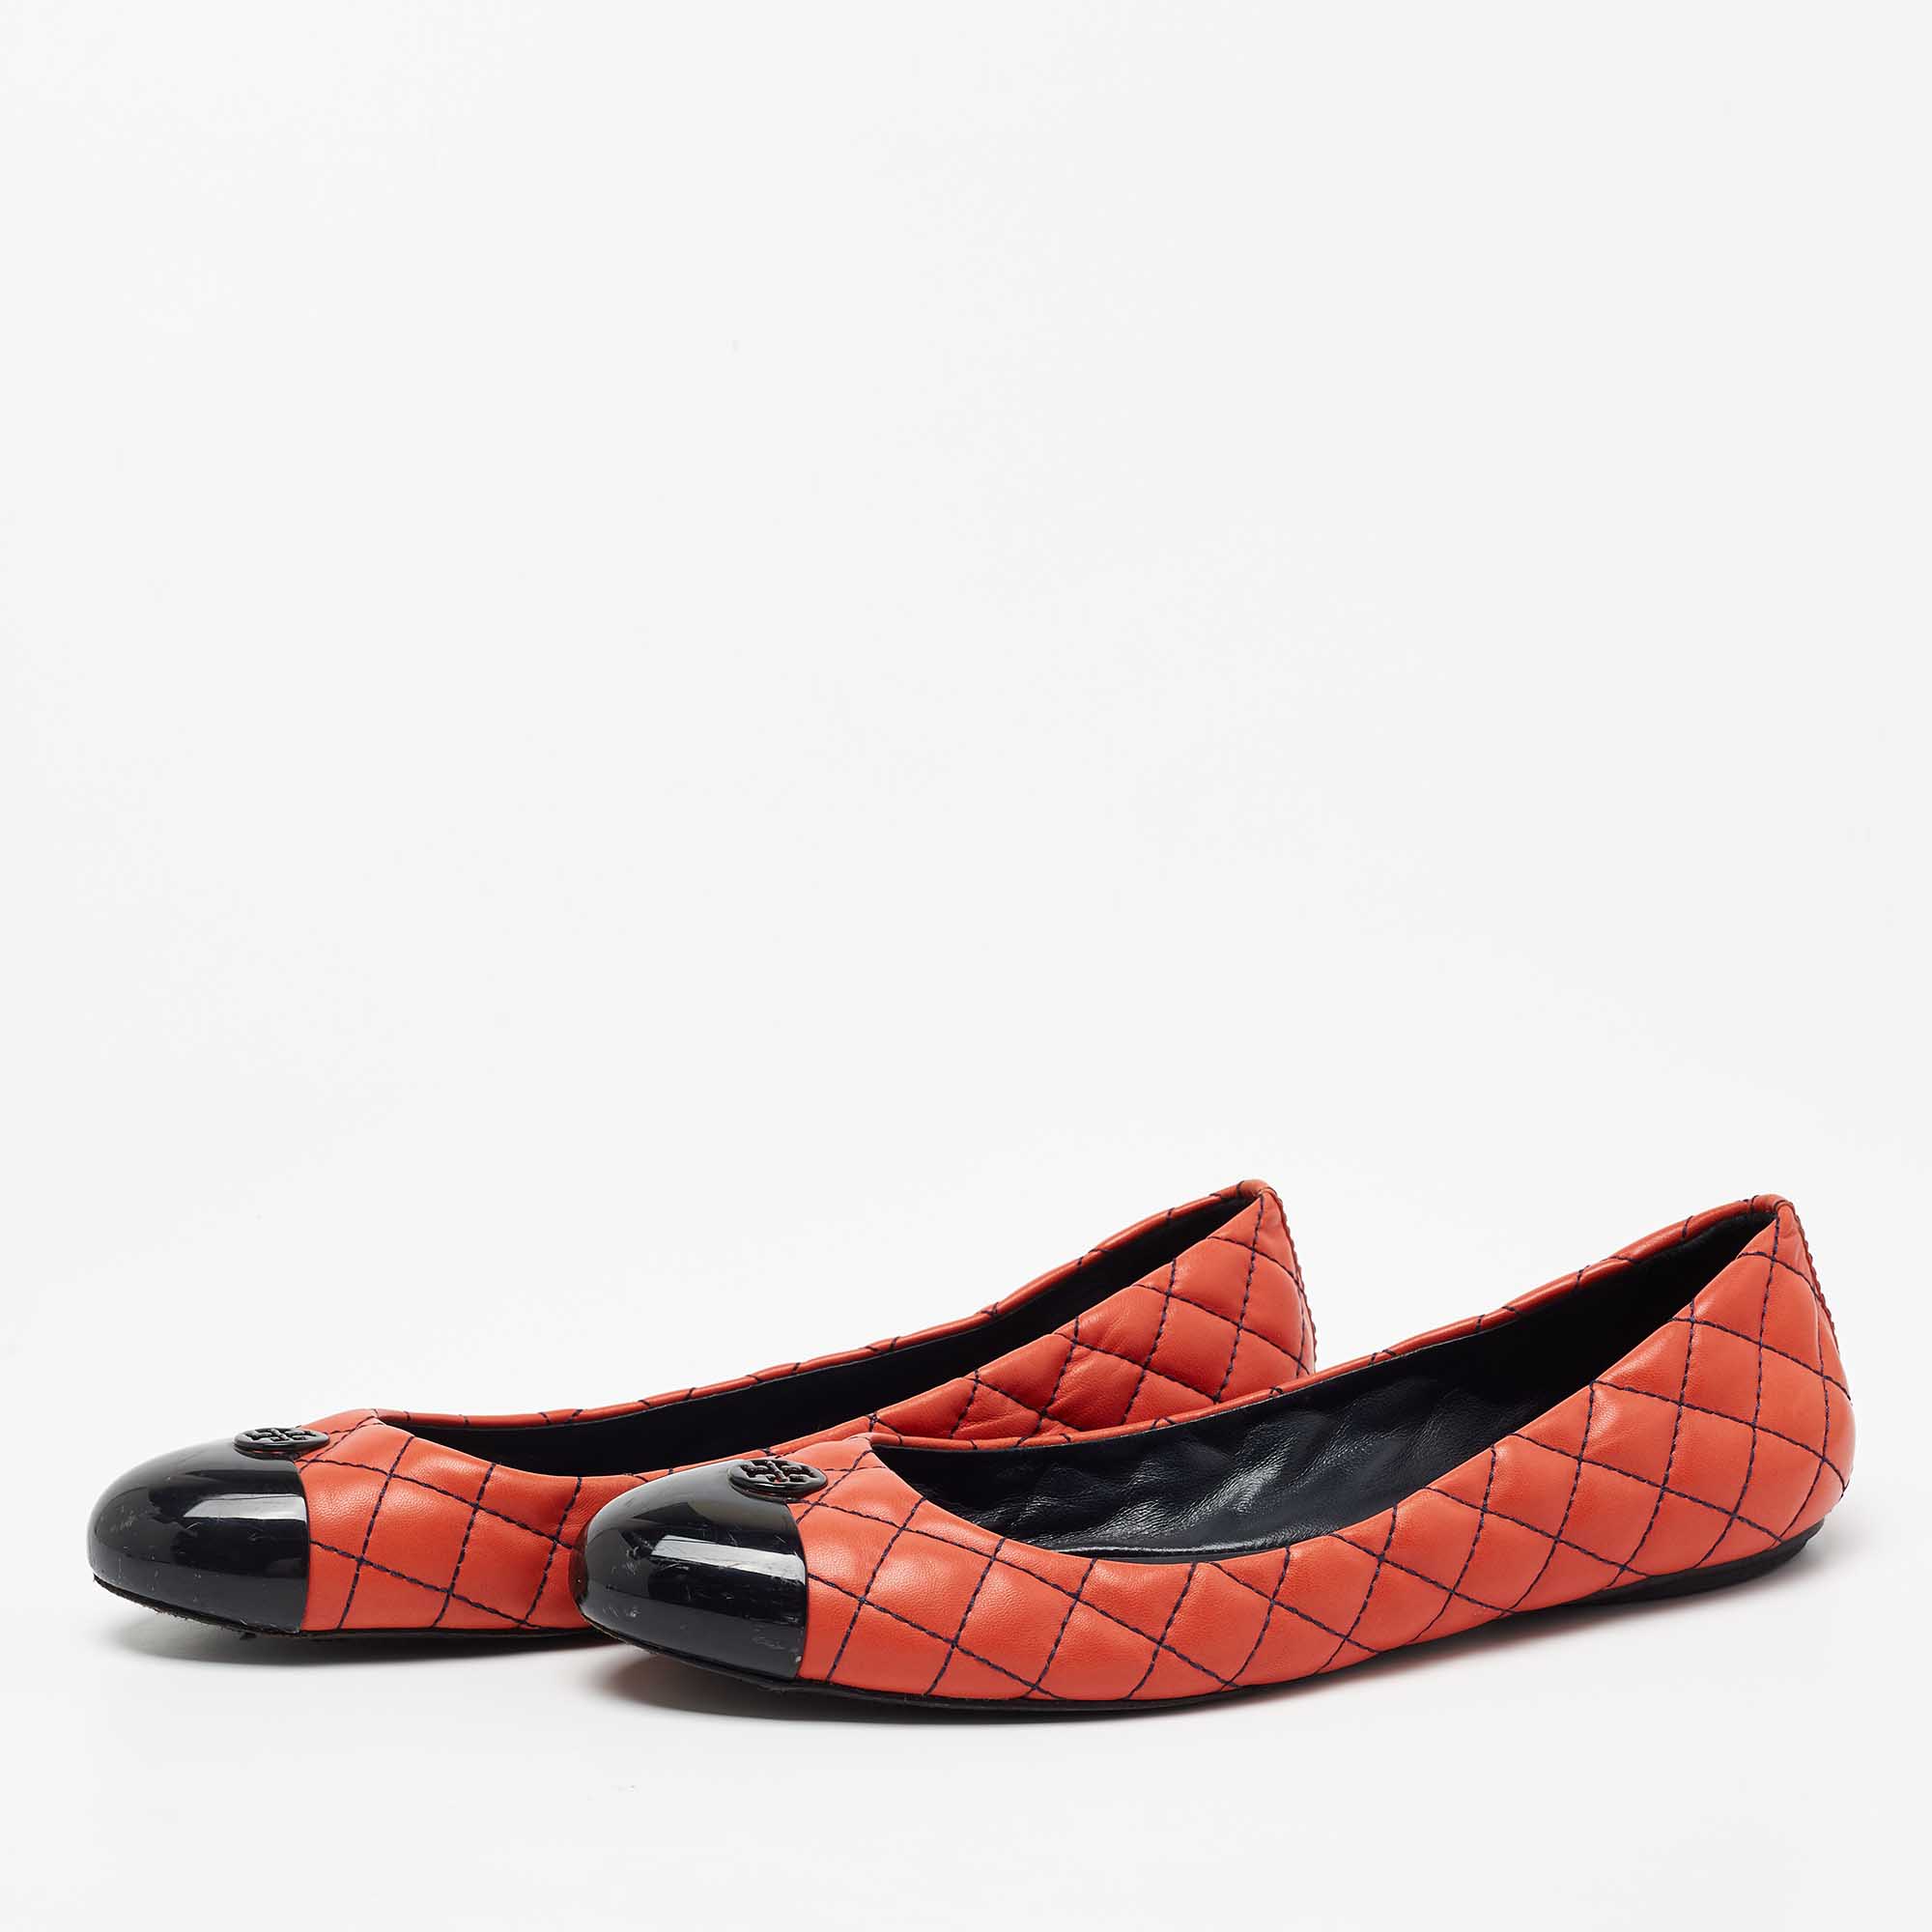 

Tory Burch Orange/Black Quilted Leather and Patent Cap Toe Kaitlin Ballet Flats Size